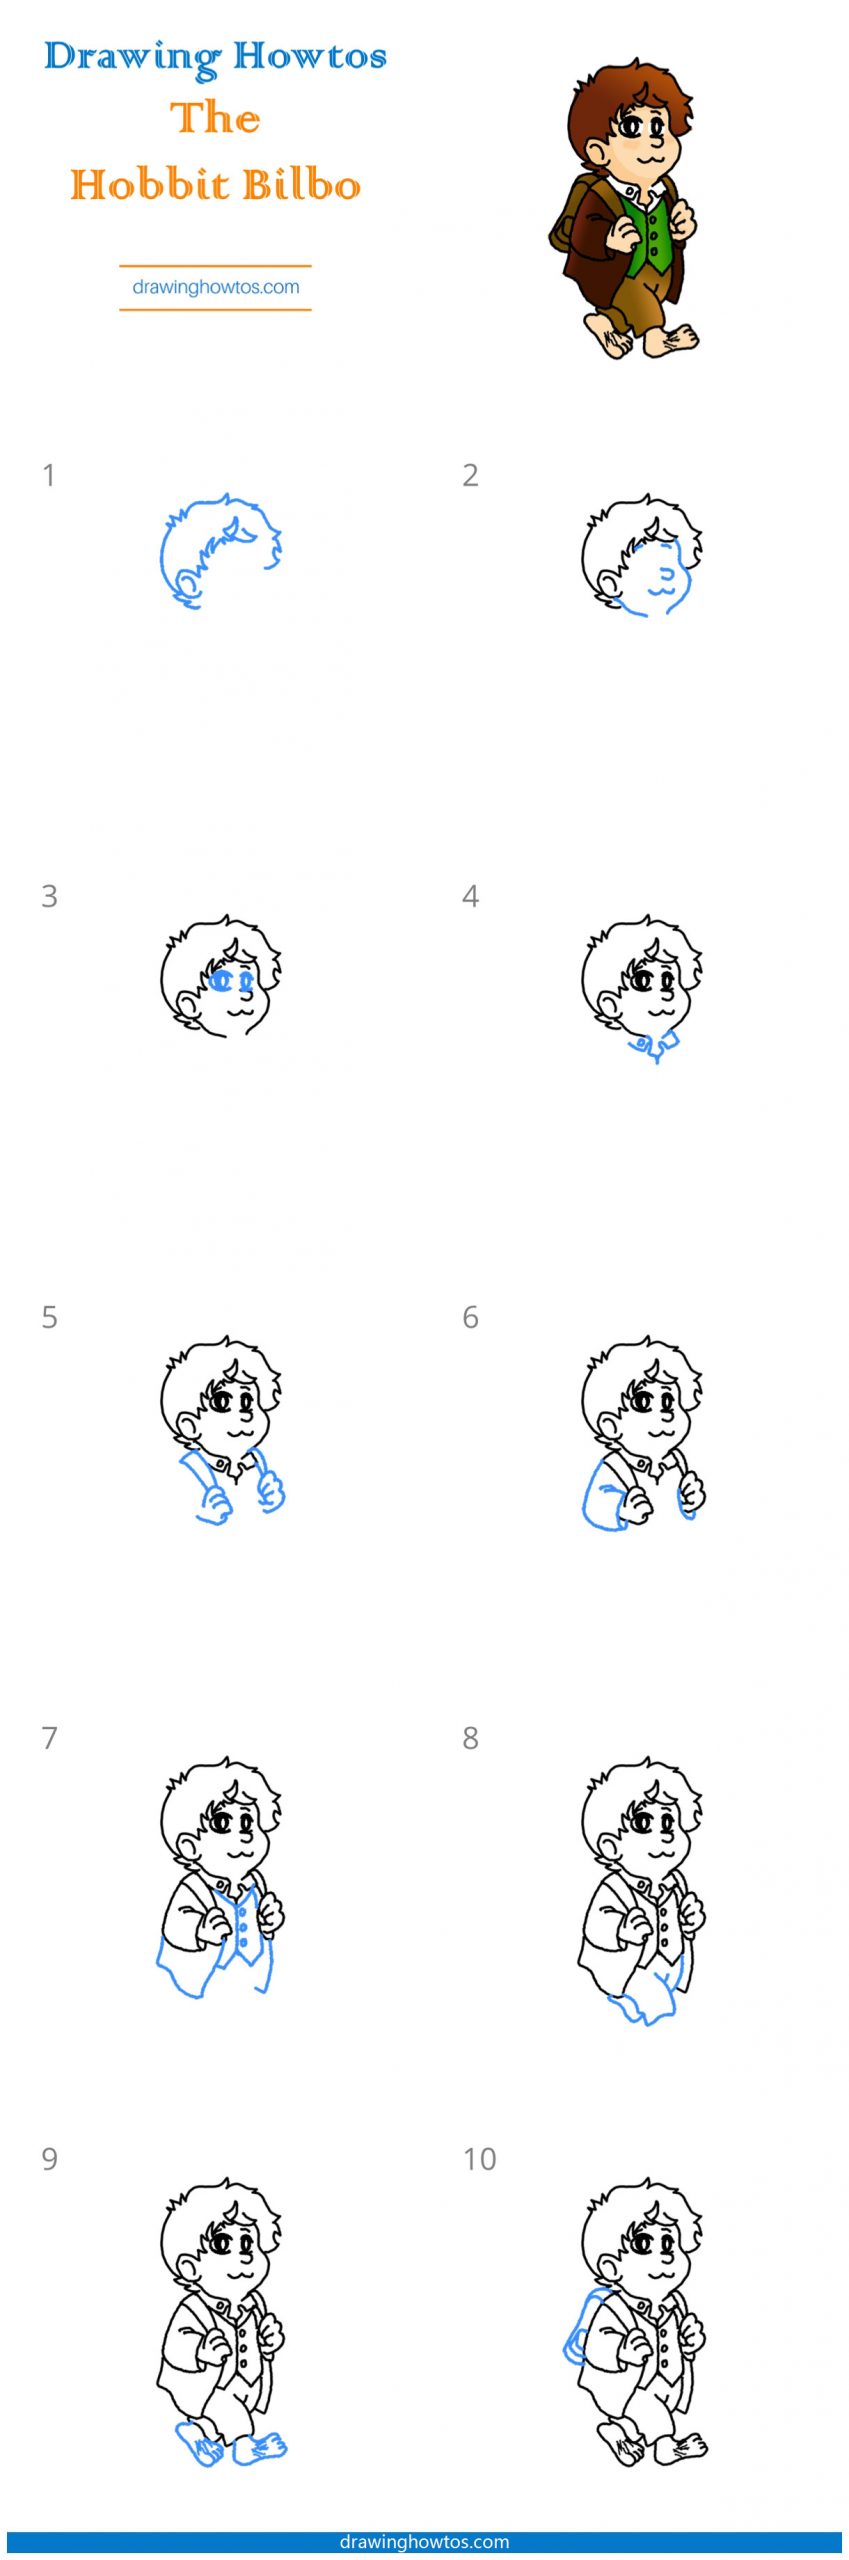 How to Draw Young Bilbo Baggins Step by Step